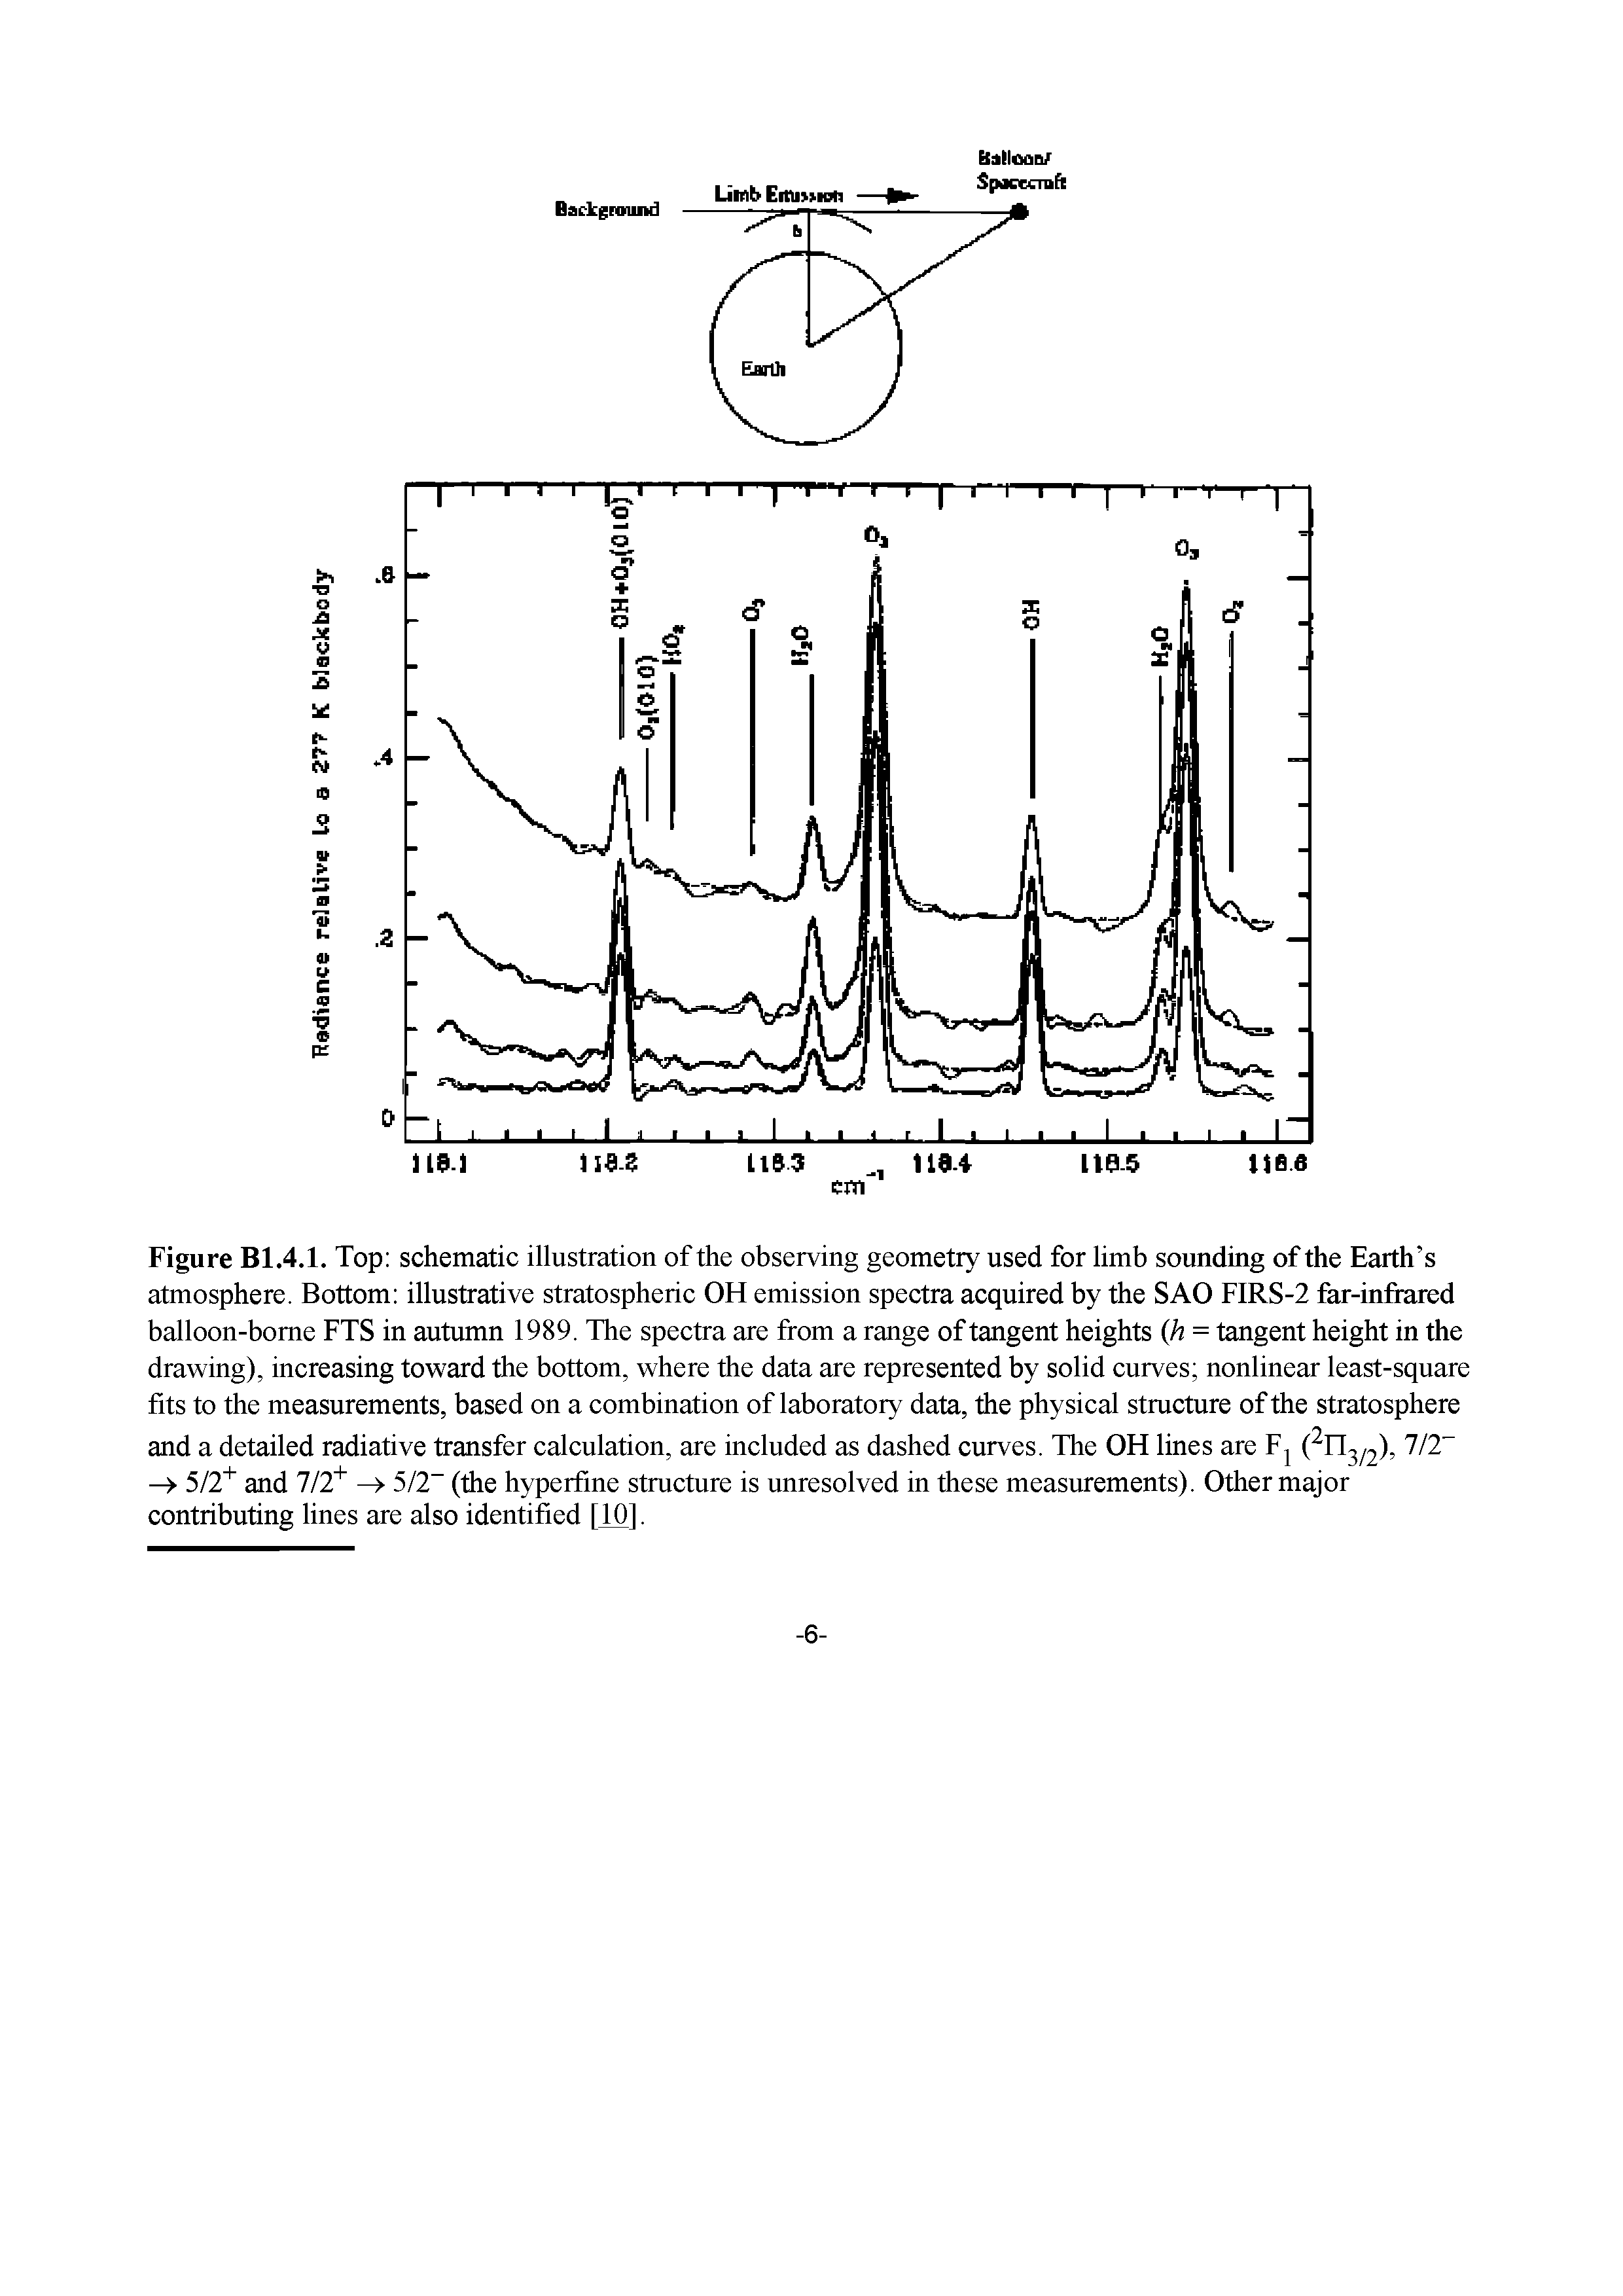 Figure Bl.4.1. Top schematic illustration of the observing geometry used for limb sounding of the Earth s atmosphere. Bottom illustrative stratospheric OH emission spectra acquired by the SAO FIRS-2 far-infiared balloon-borne FTS in autumn 1989. The spectra are from a range of tangent heights h = tangent height in the drawing), increasing toward the bottom, where the data are represented by solid curves nonlinear least-square fits to the measurements, based on a combination of laboratory data, the physical structure of the stratosphere and a detailed radiative transfer calculation, are included as dashed curves. The OH lines are Fj 7/2 ...